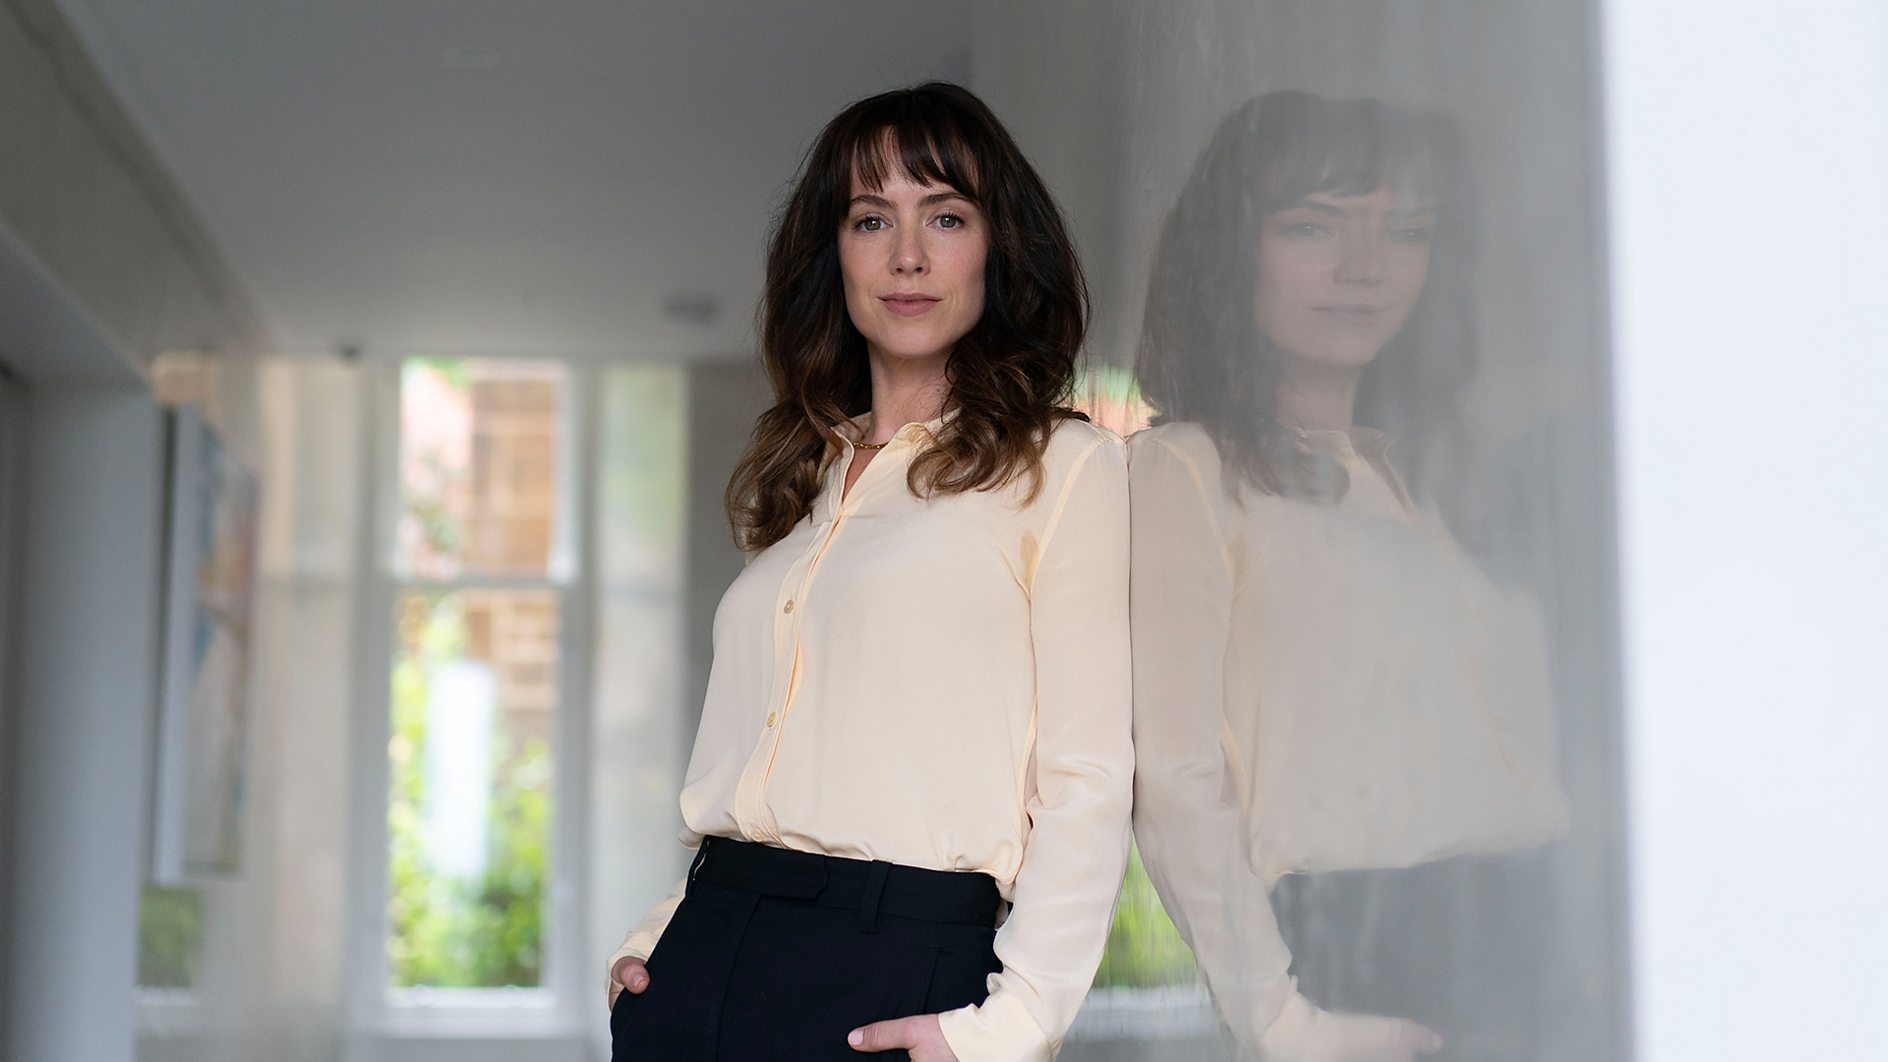 Interview with Amy Manson (Rhona Moncrieffe) from new BBC crime series Rebus